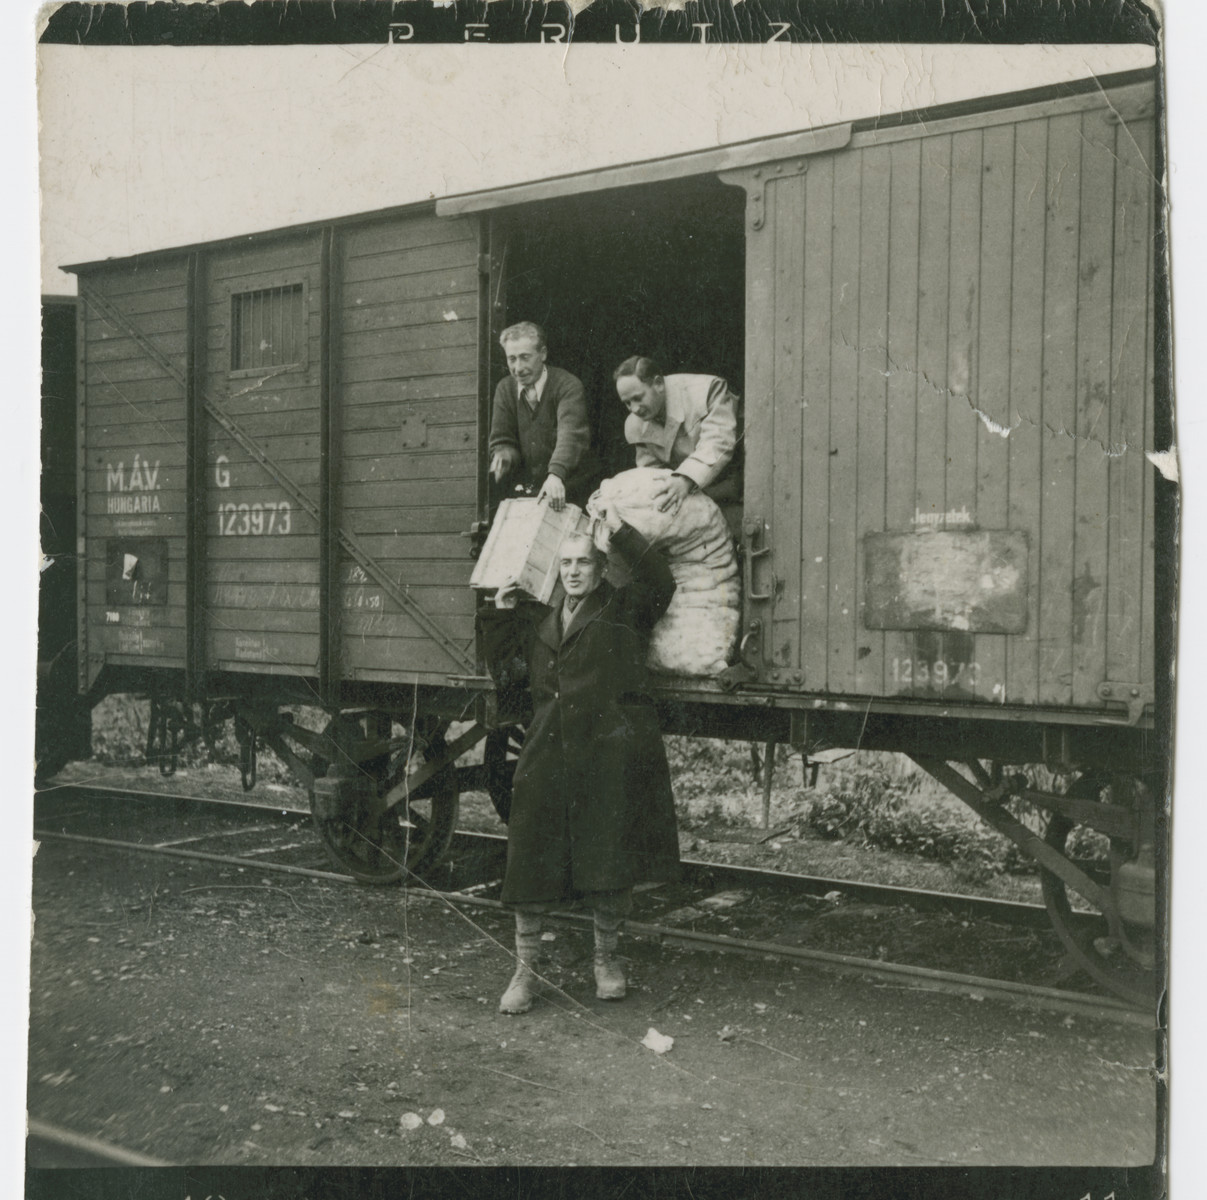 Hungarian Jews load or unload cargo into a cattle car while awaiting deportation to a forced labor battalion.

Among those pictured is Imre Winkler.